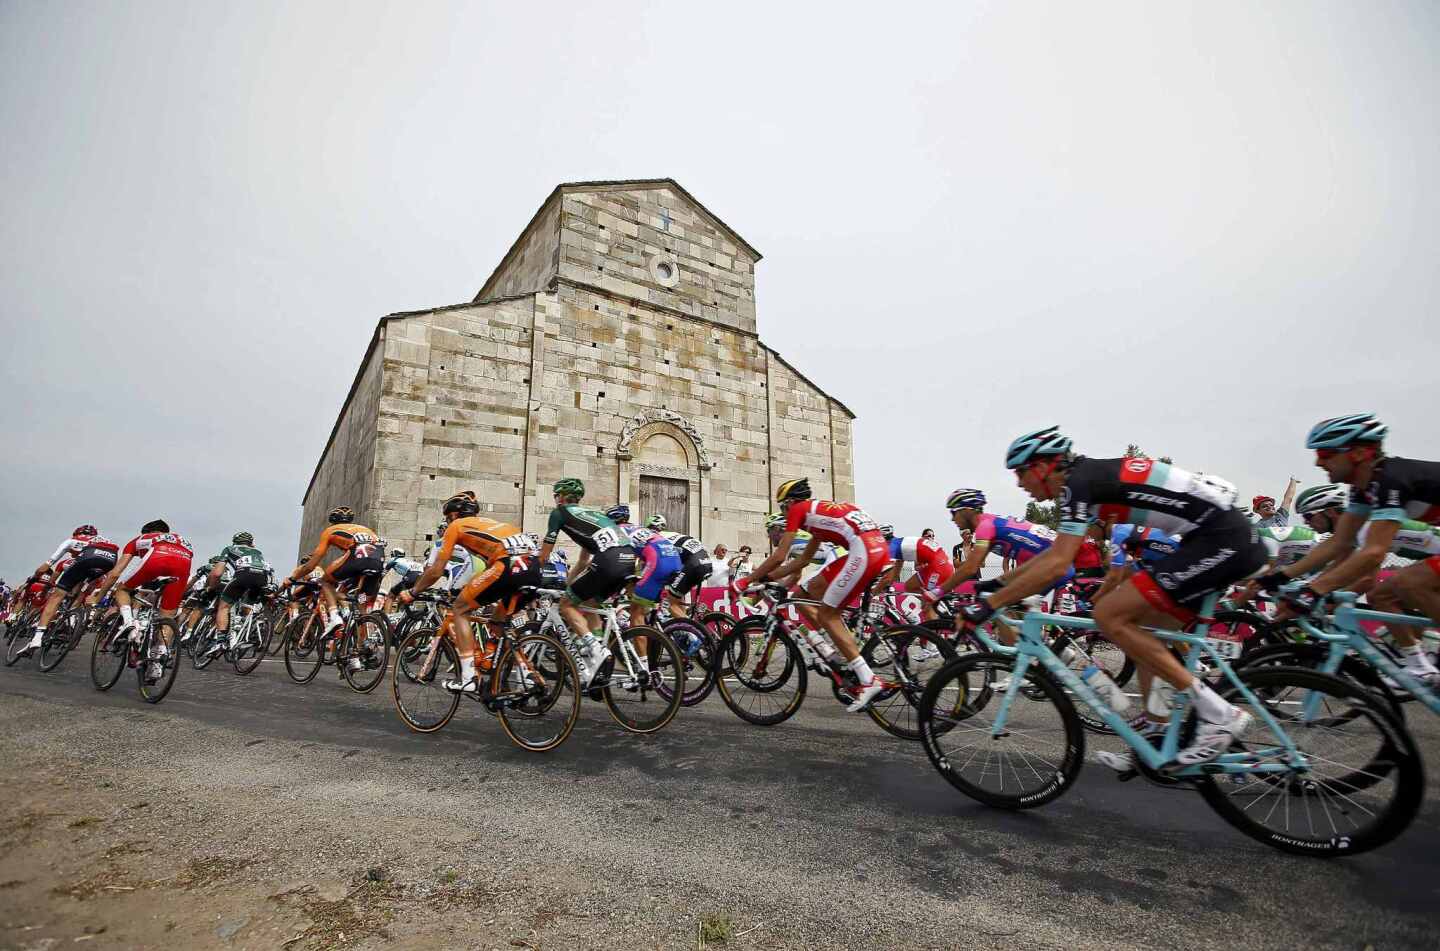 The pack of riders cycles on its way during the 213 km first stage of the centenary Tour de France cycling race from Porto-Vecchio to Bastia, on the French Mediterranean island of Corsica June 29, 2013.